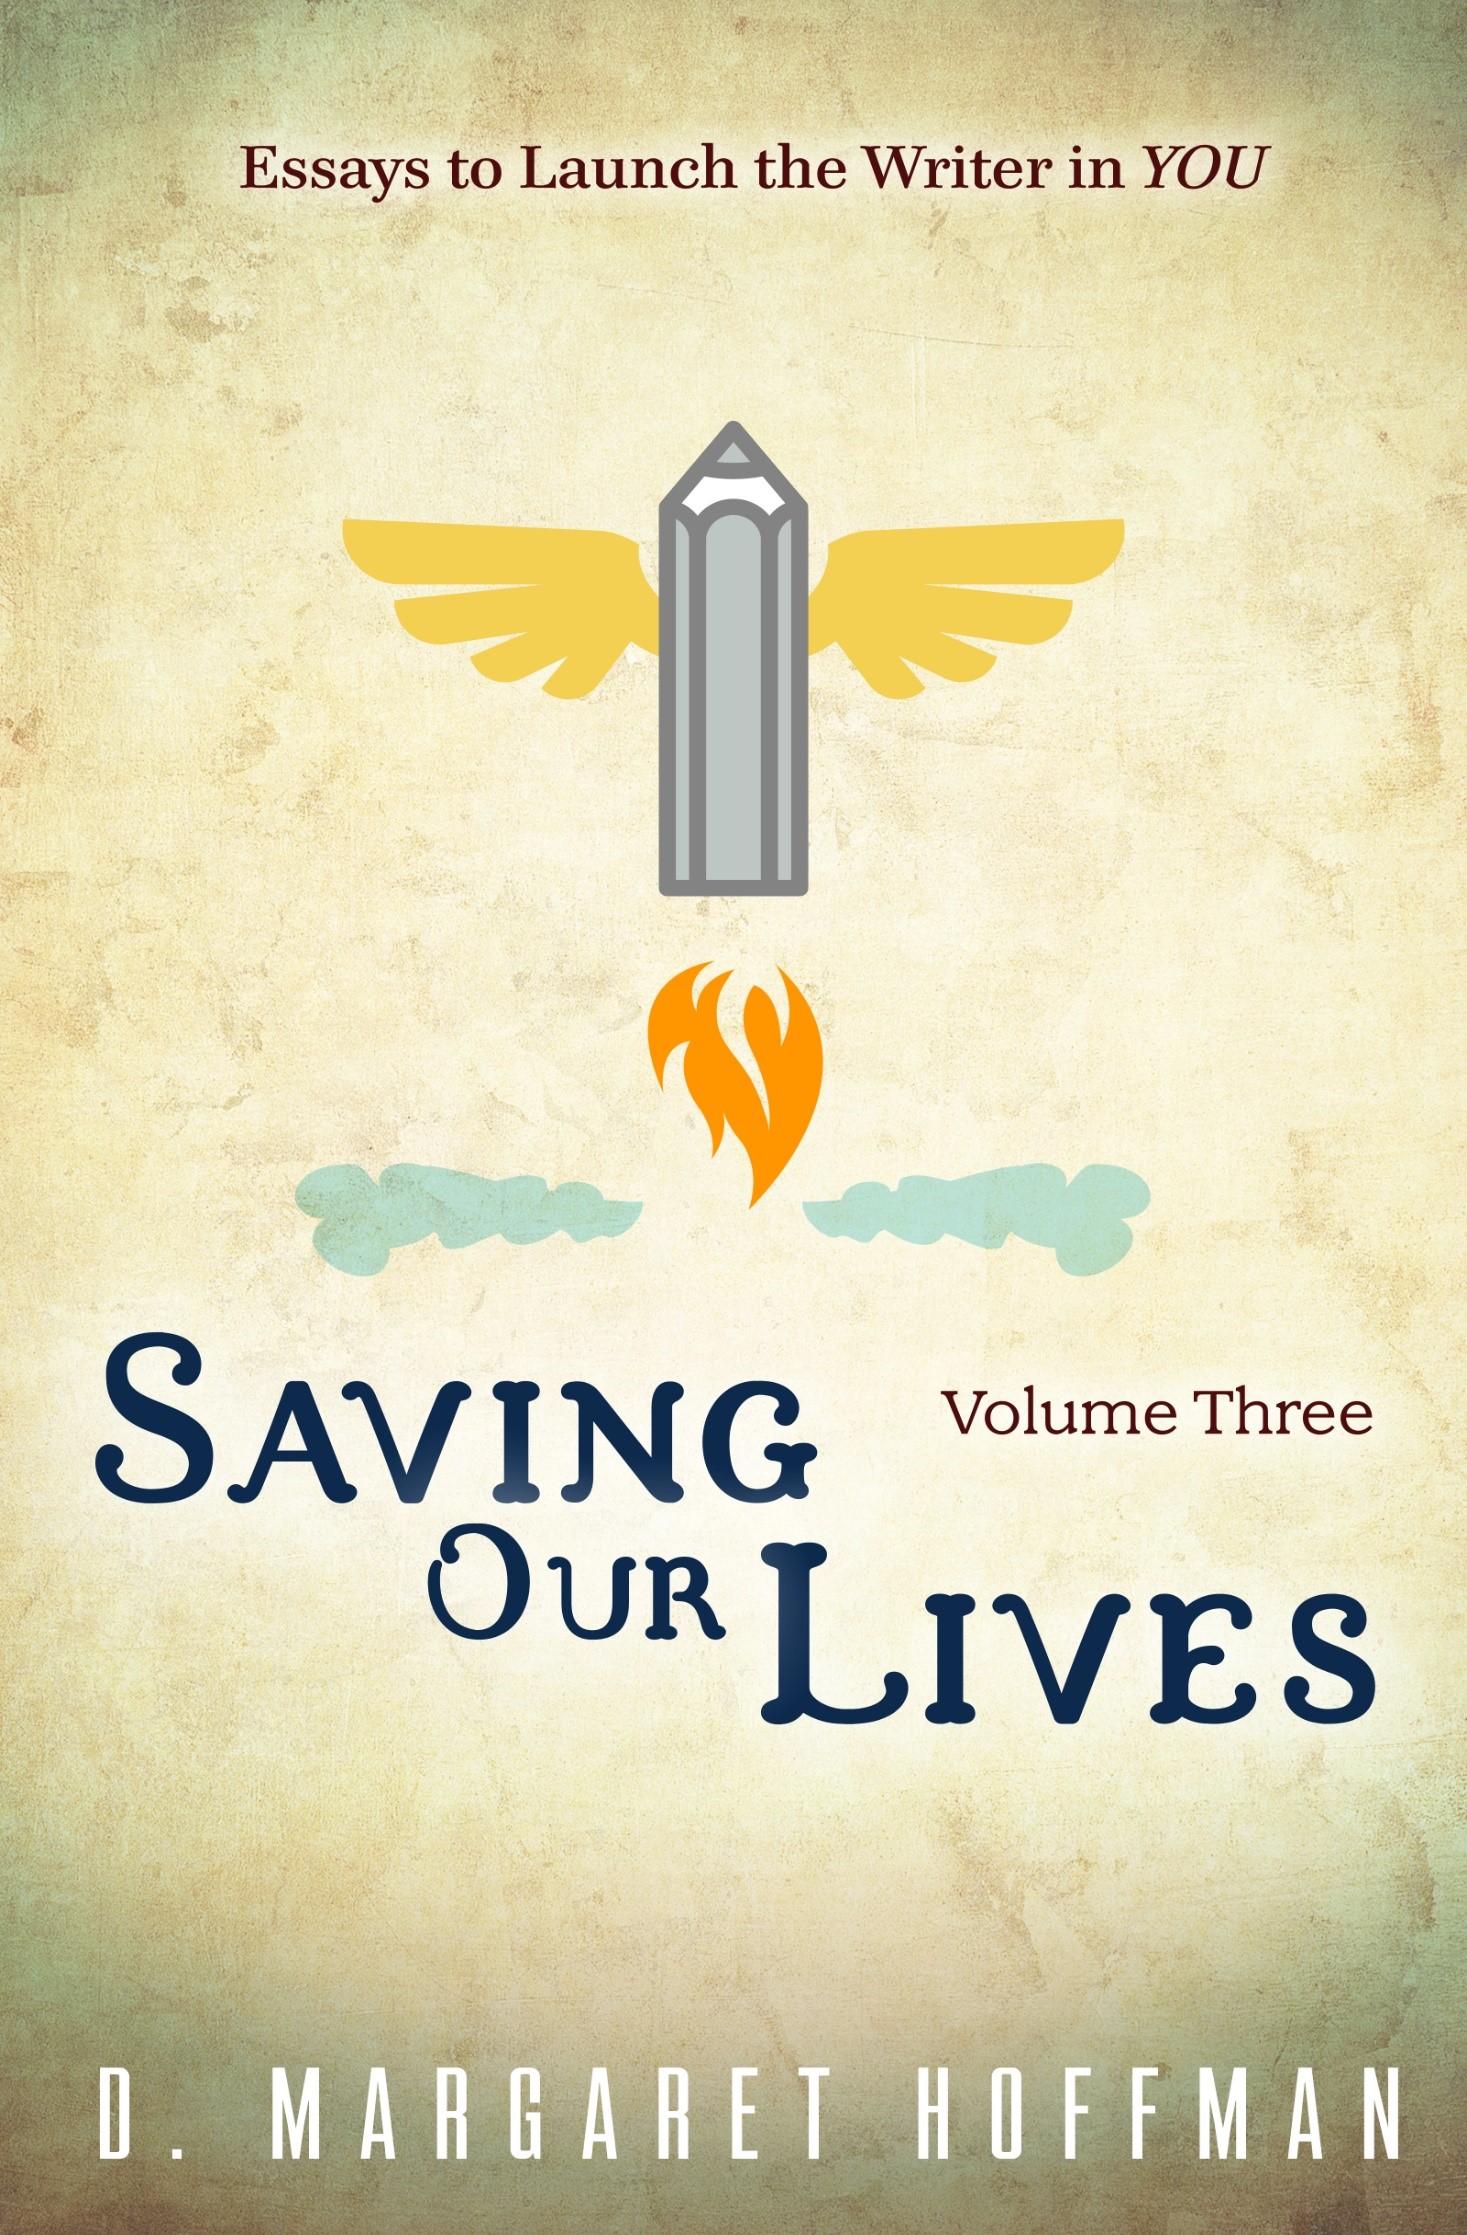 saving our lives volume three - launching the writer in you